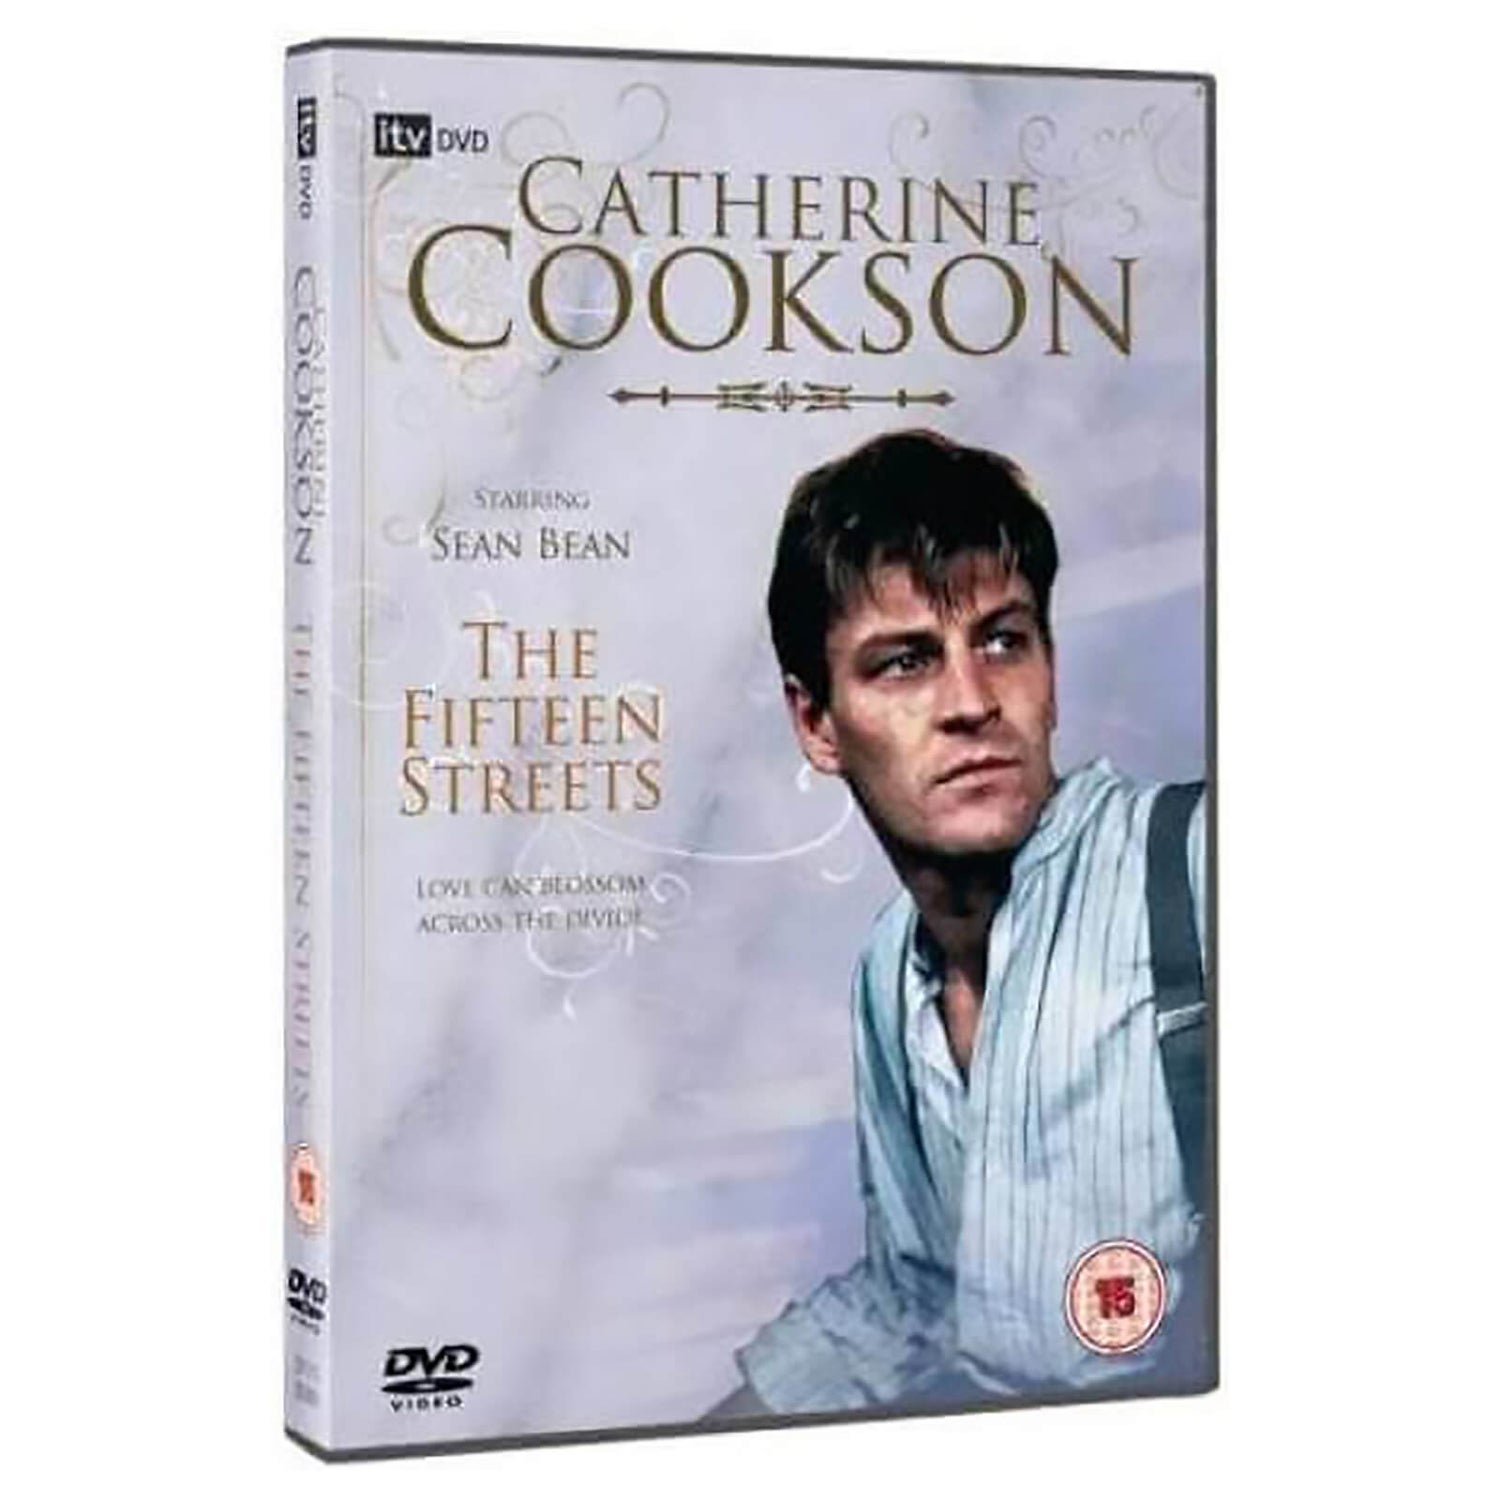 Catherine Cookson - The Fifteen Streets